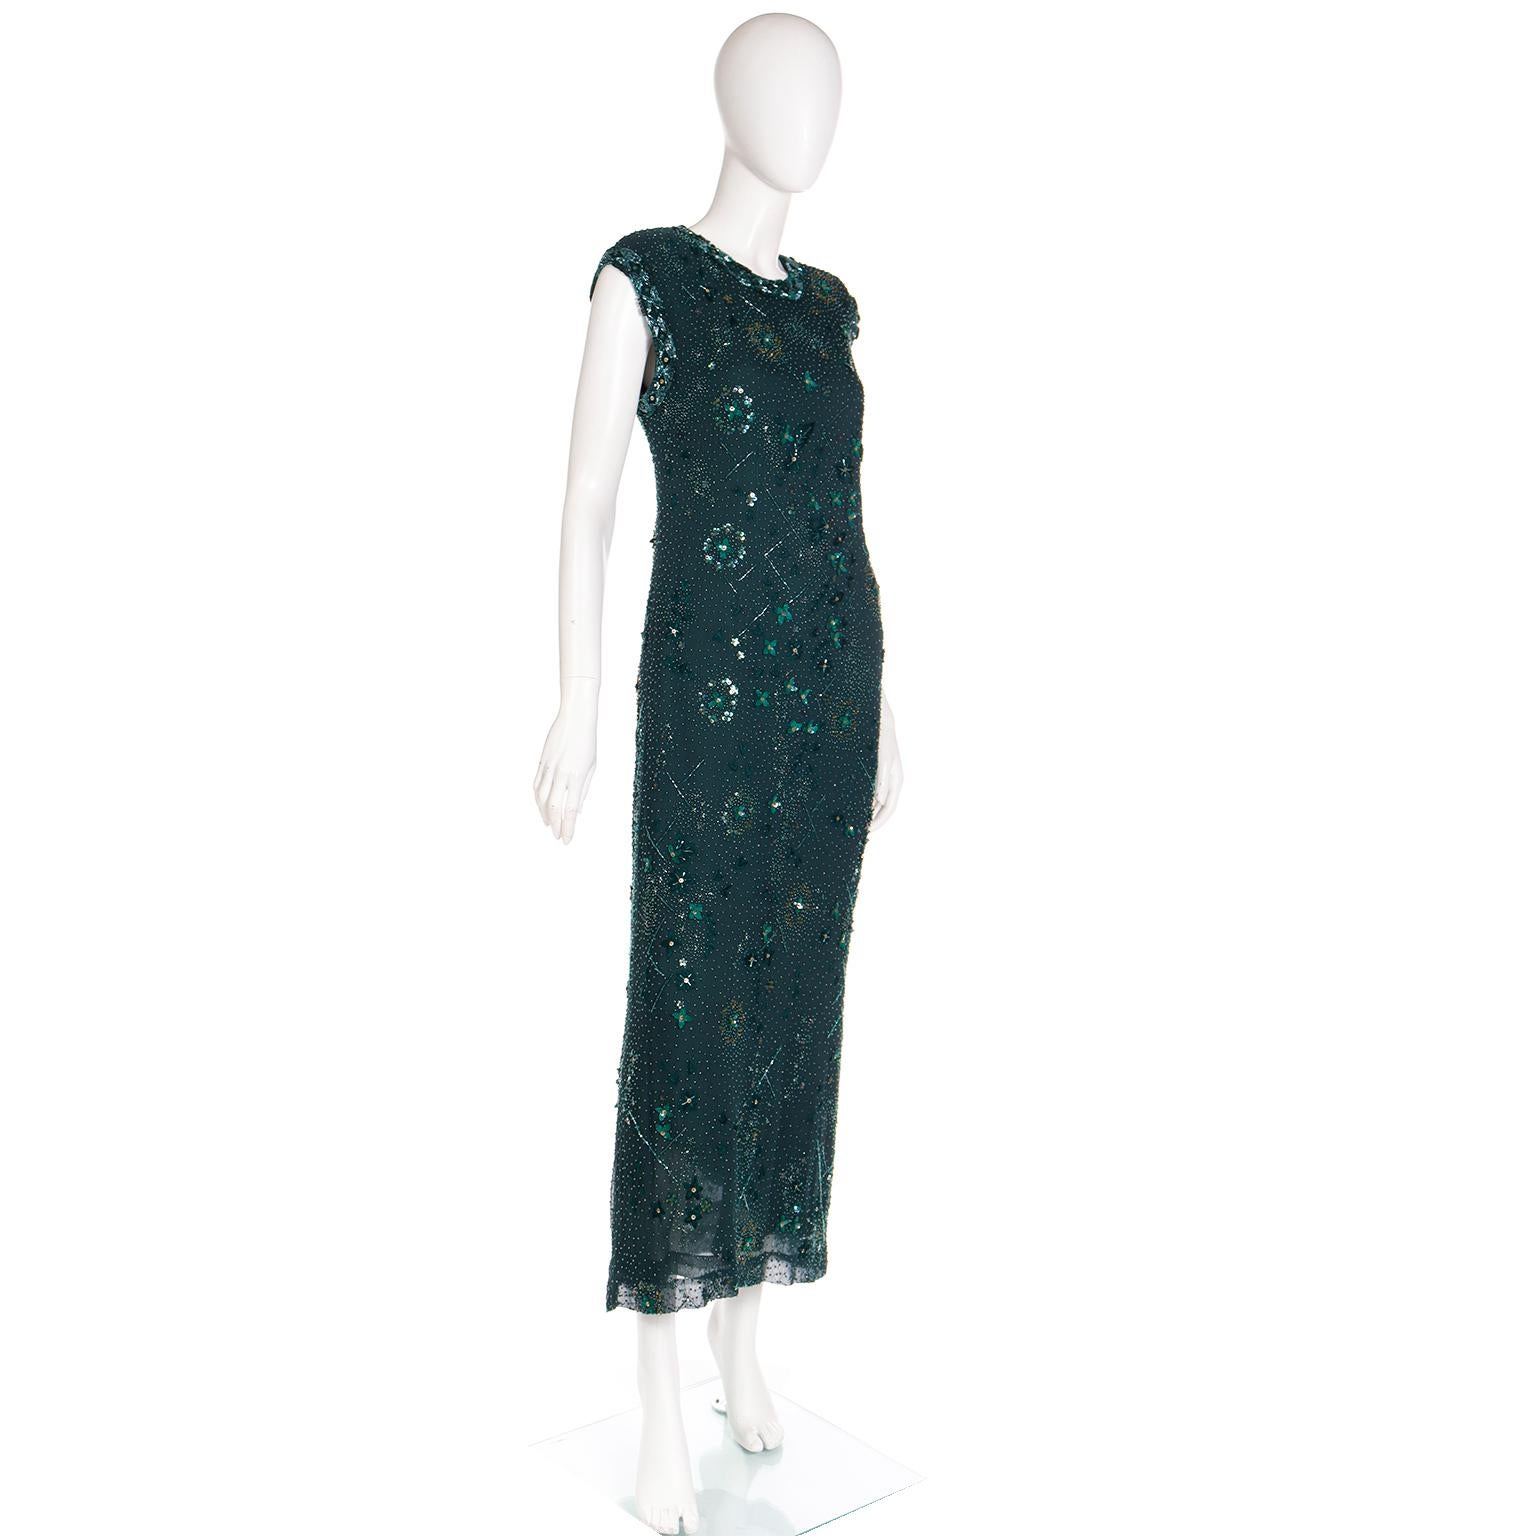 Richilene Vintage Dress Beaded Green Evening Gown w Silk Beaded Shawl Wrap In Excellent Condition For Sale In Portland, OR